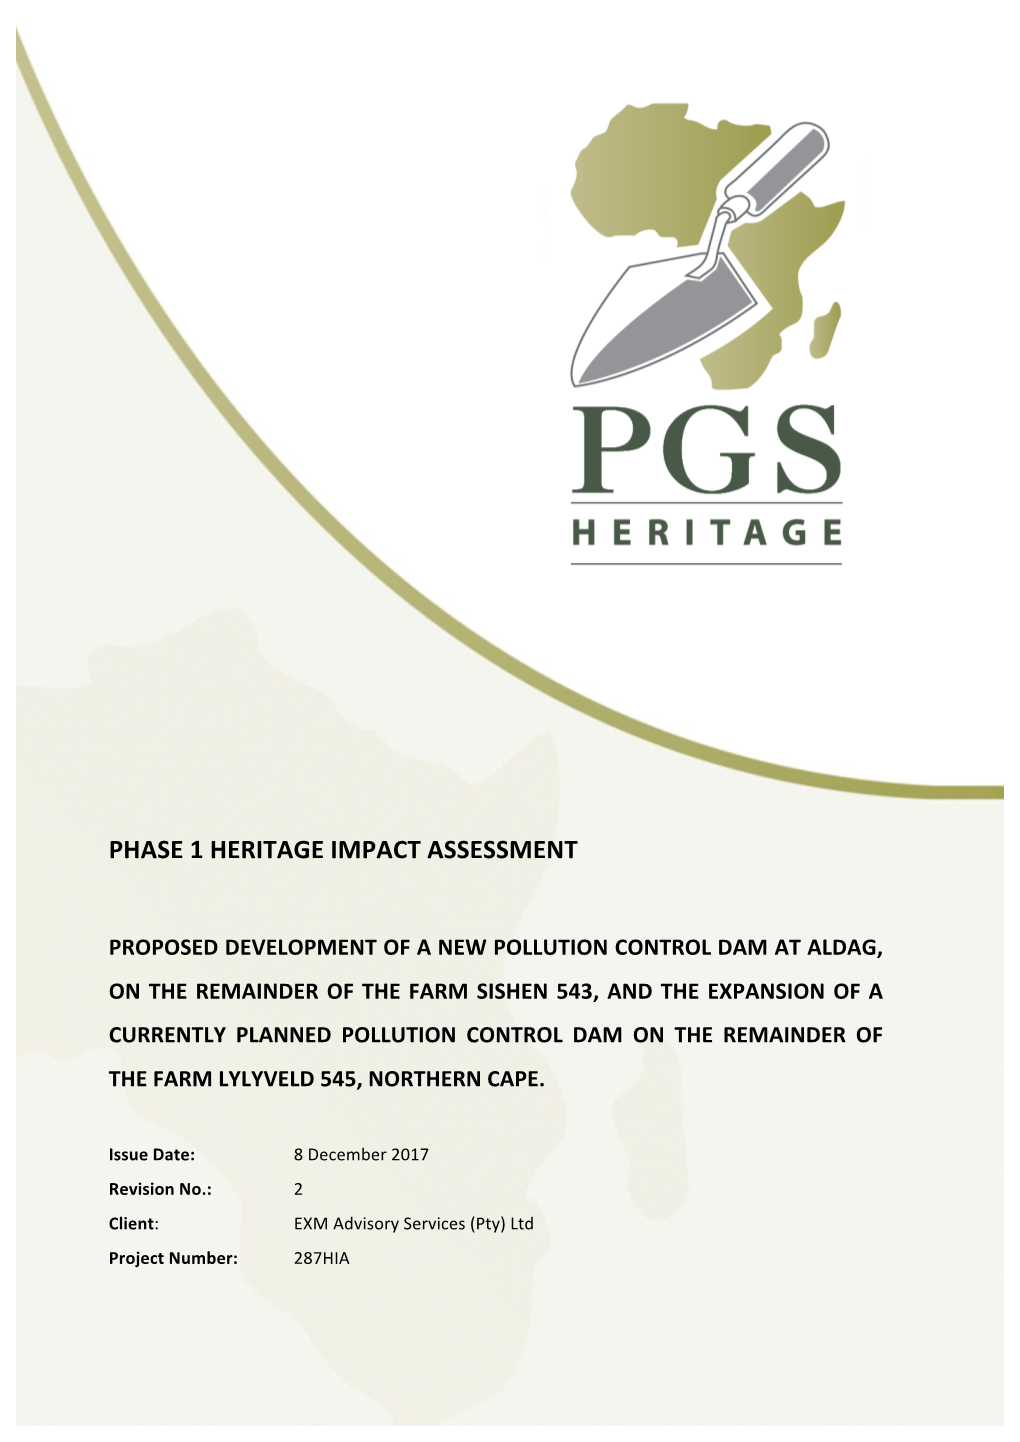 Phase 1 Heritage Impact Assessment